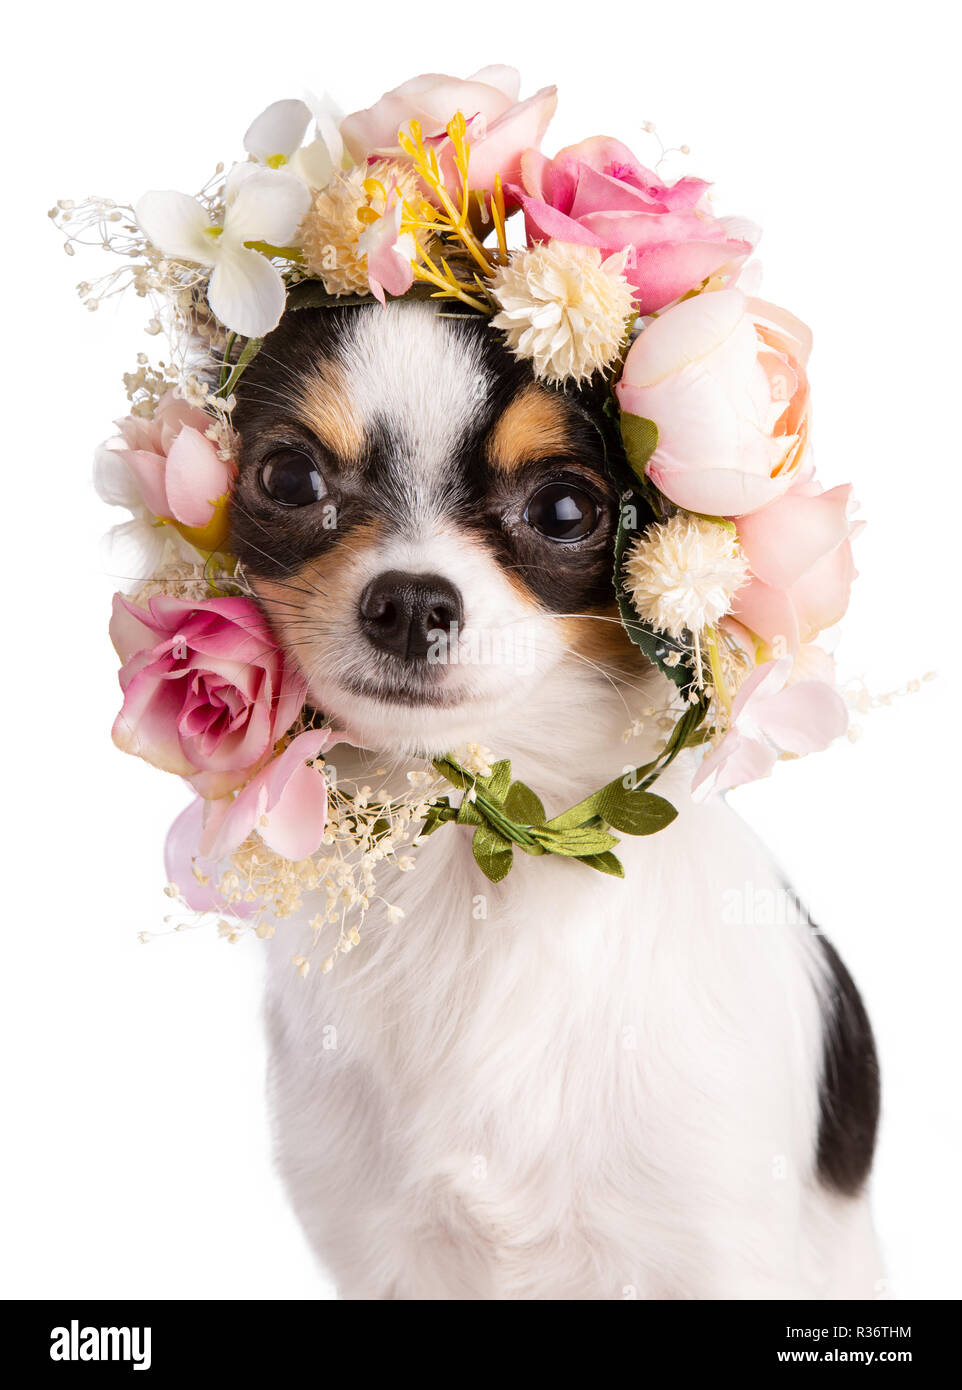 Young Chihuahua with a wreath of white and pink flowers on a white background Stock Photo